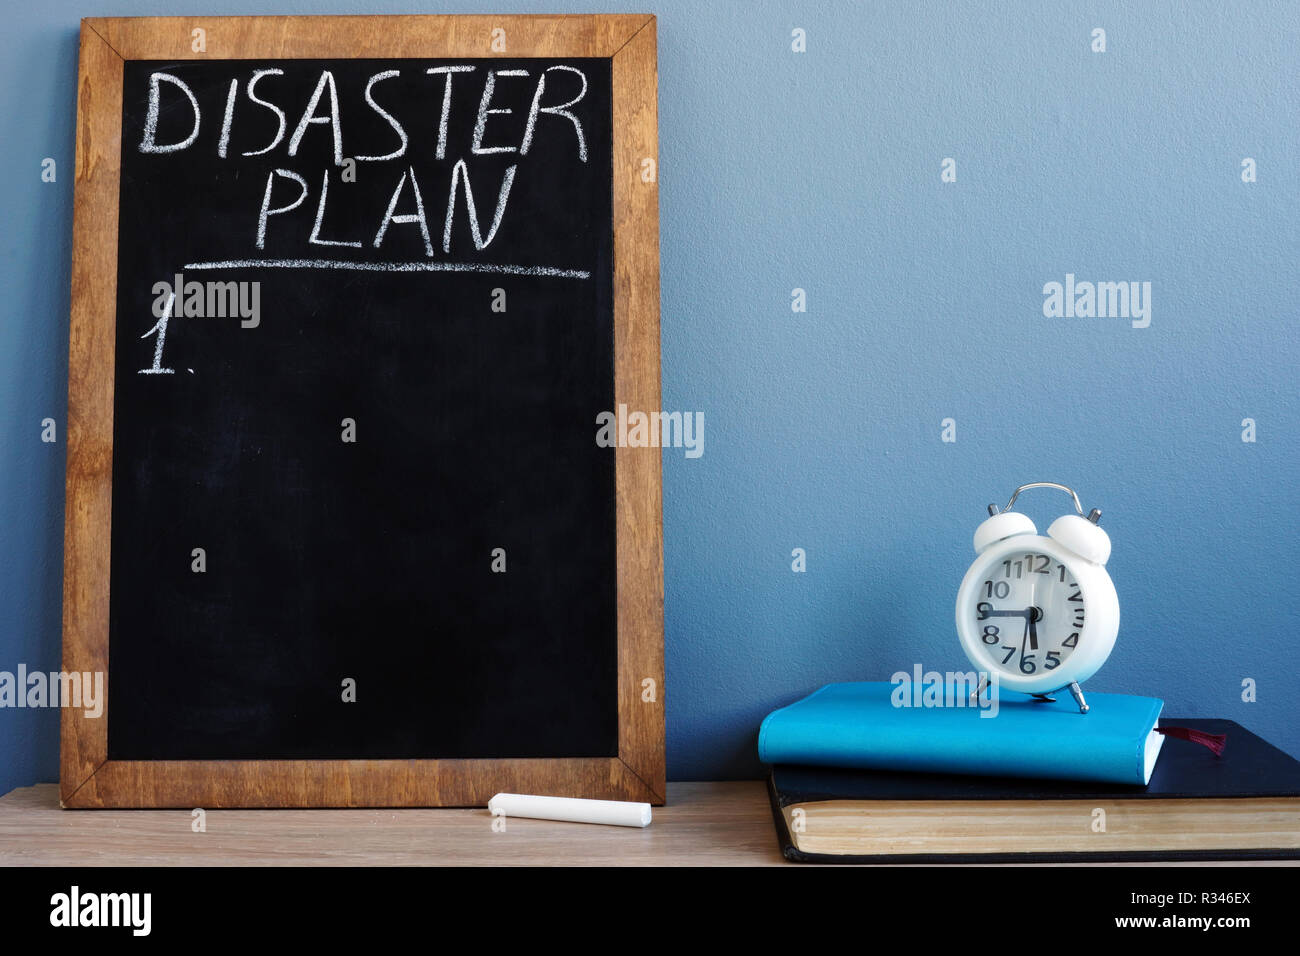 Disaster Plan written on a blackboard and notepads. Stock Photo